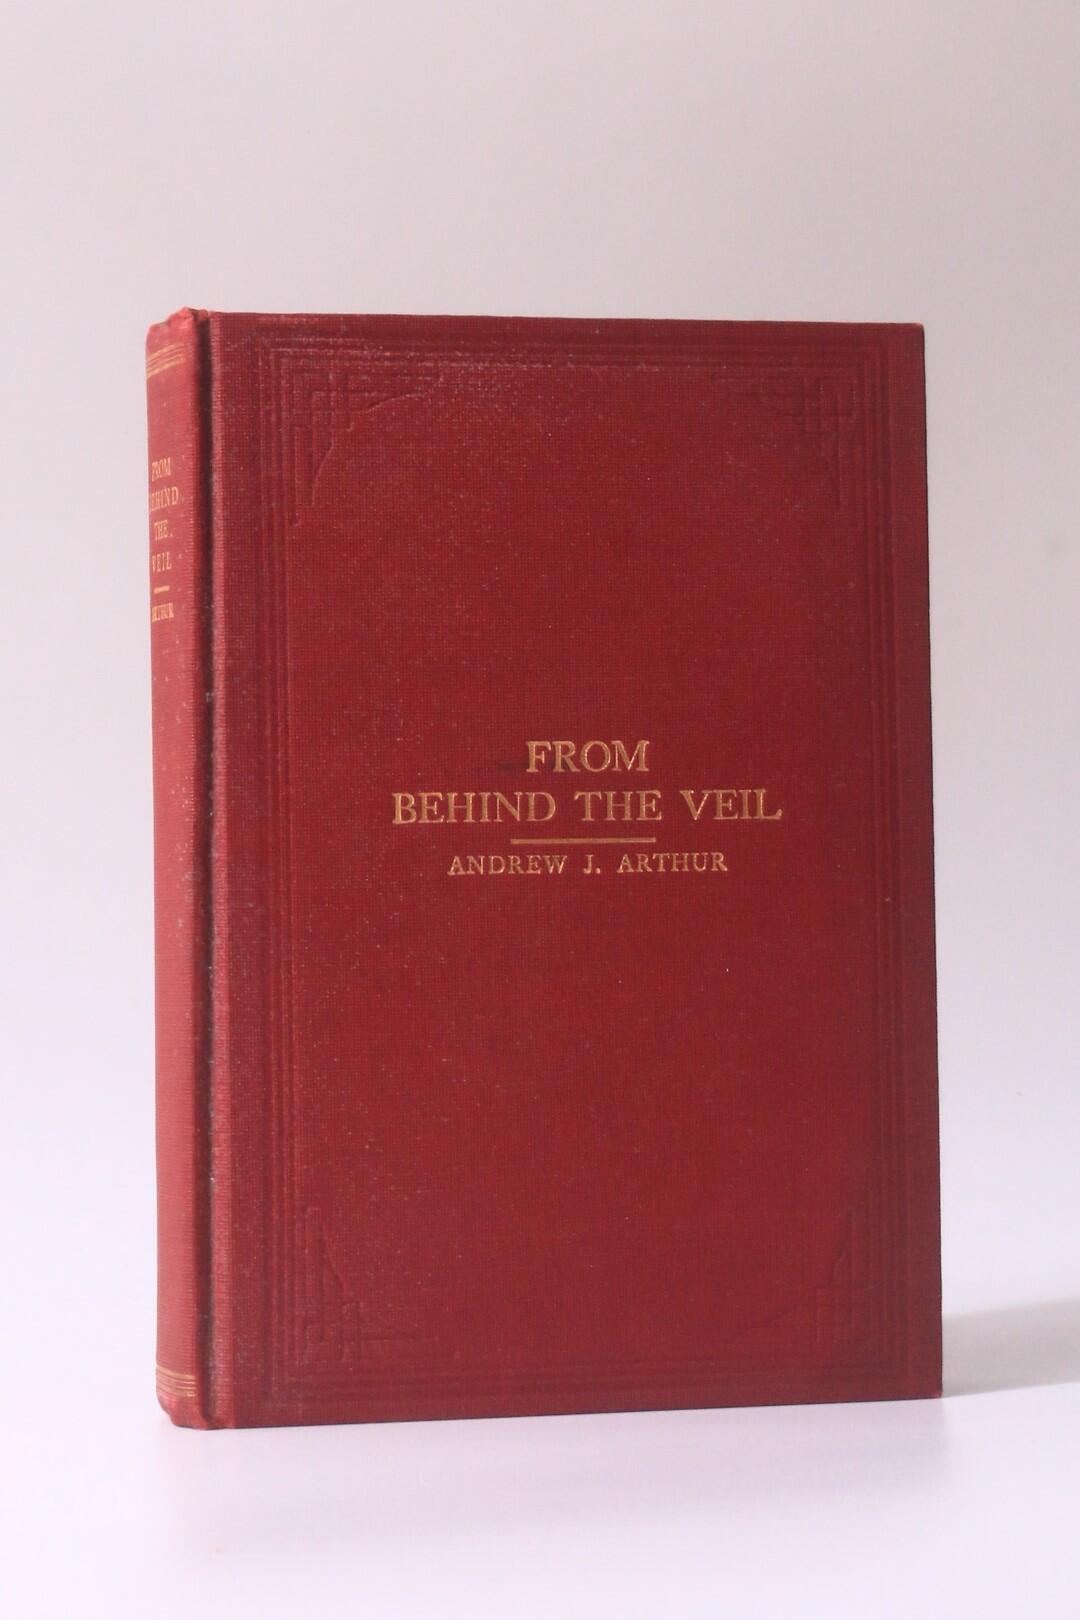 Andrew J. Arthur - From Behind the Veil - Christian Publishing Company, 1901, Signed First Edition.